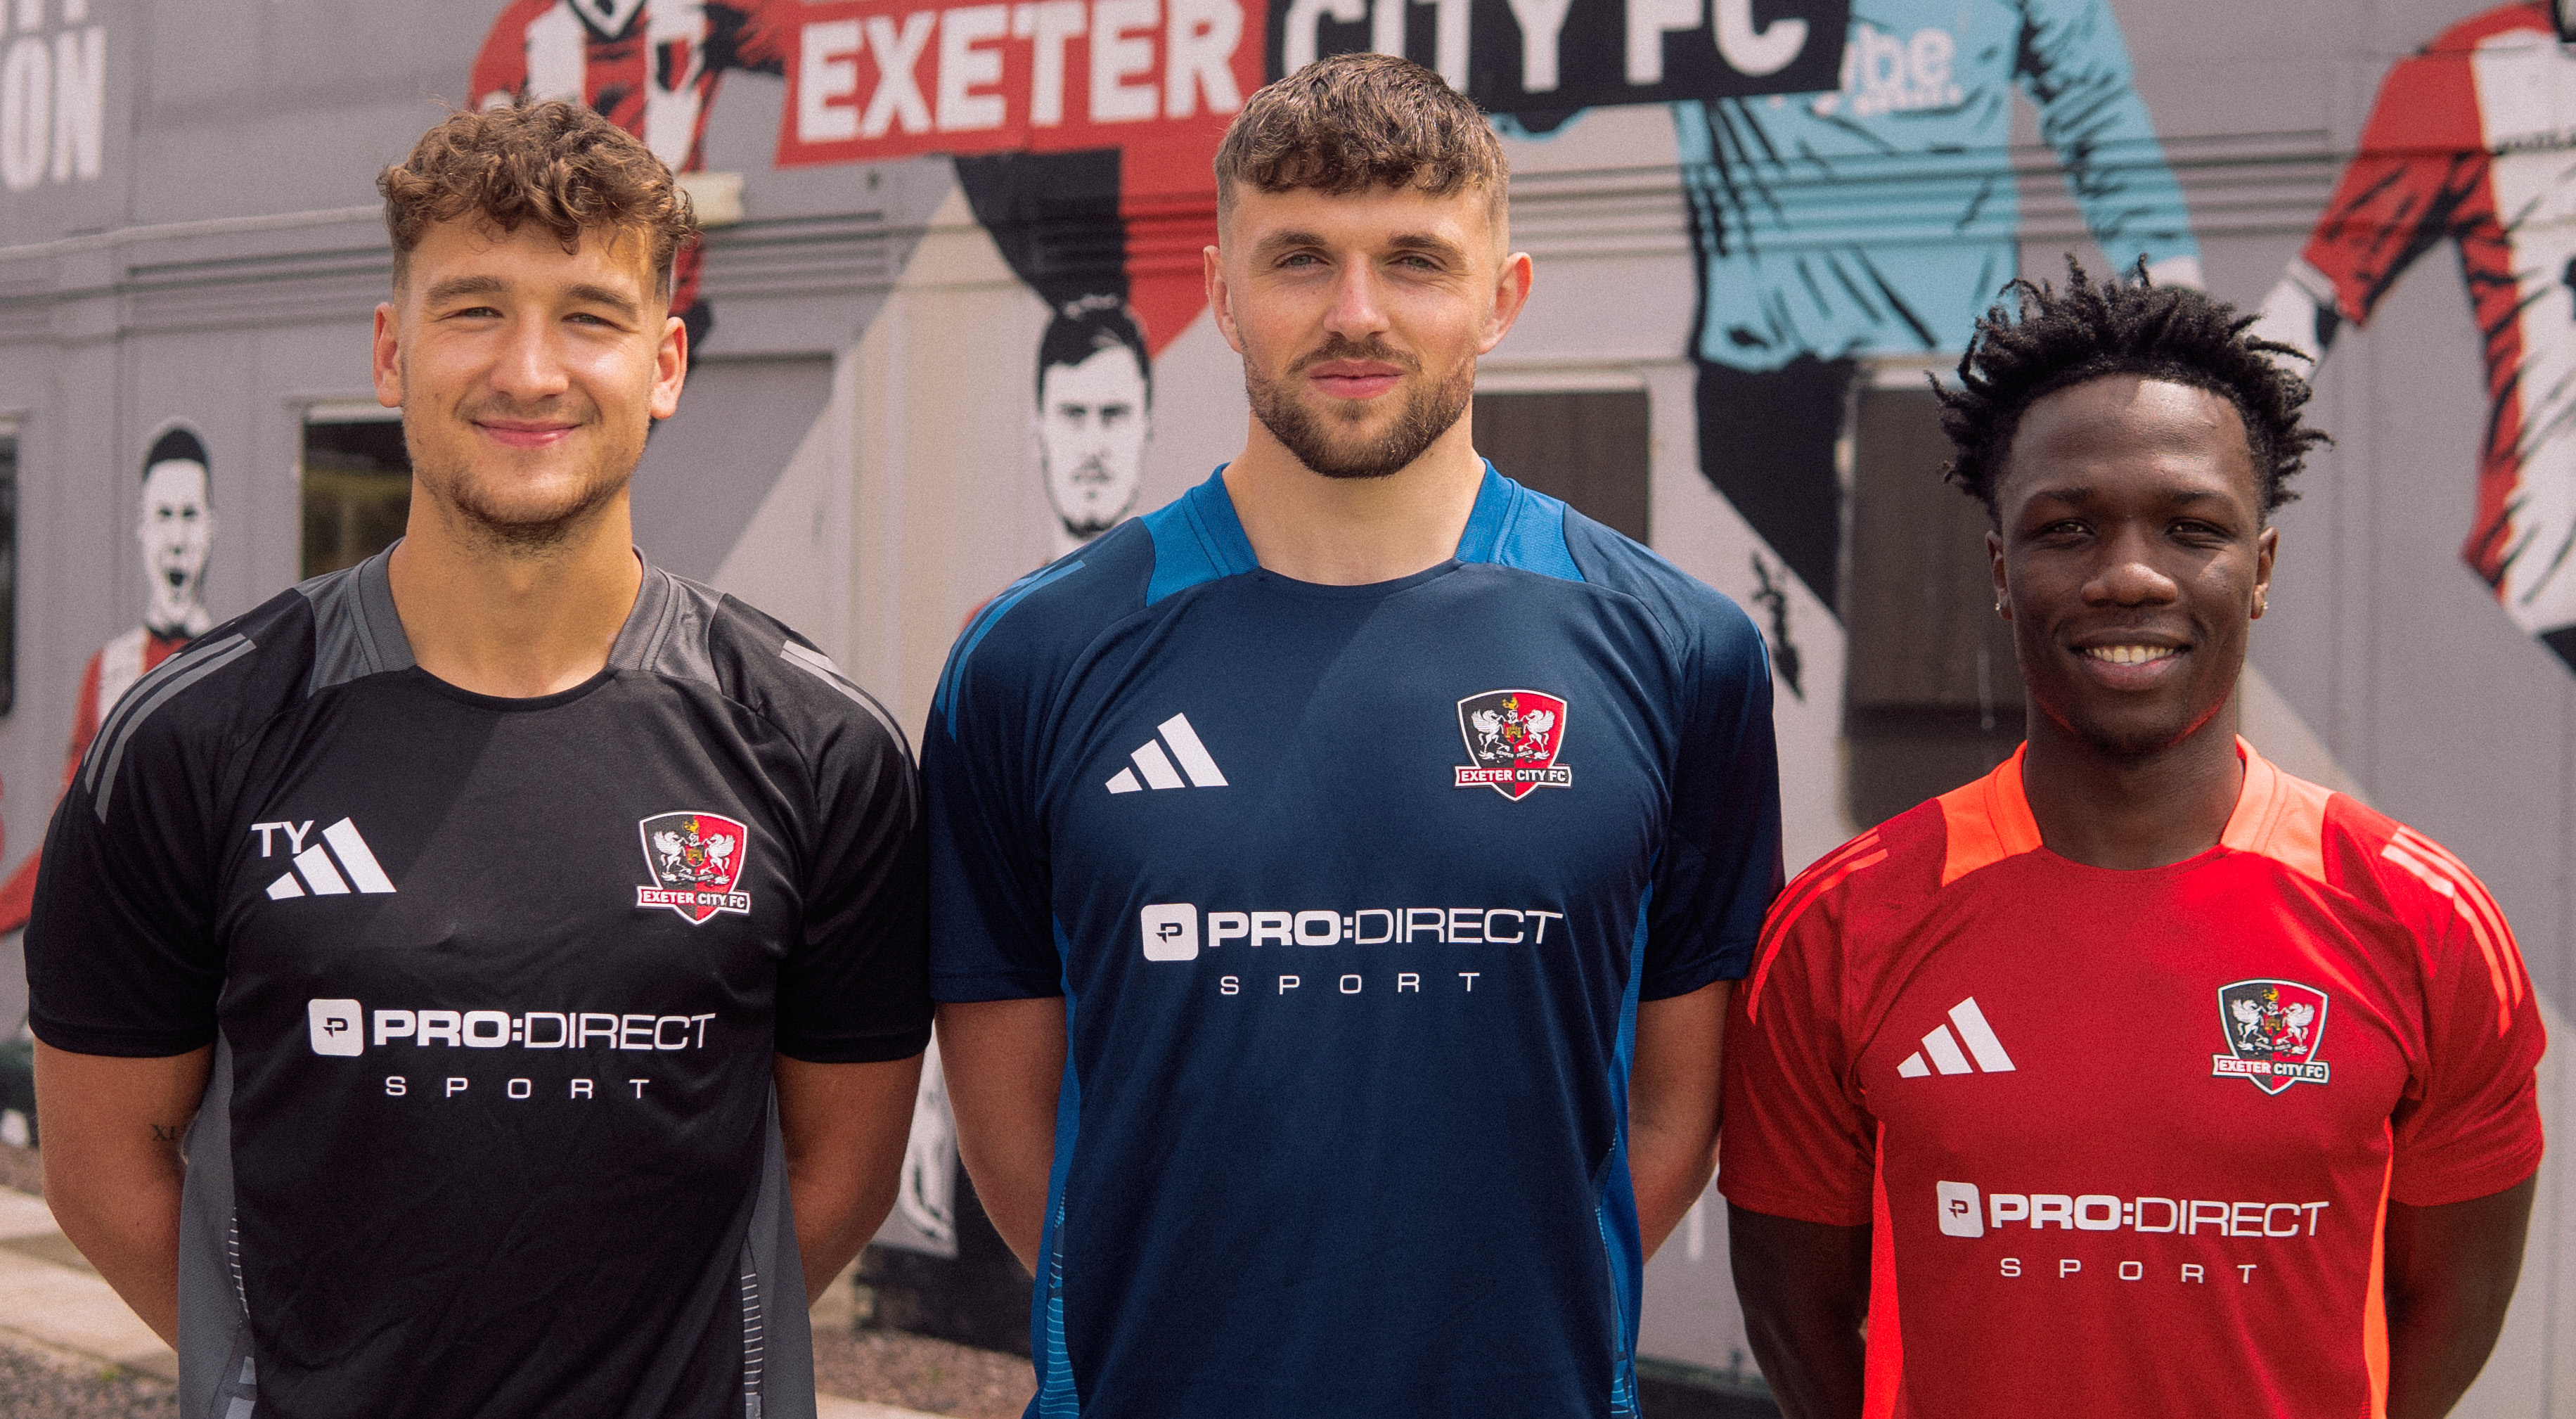 Tom Yates, Harry Lee and Vincent Harper showing off the new training wear